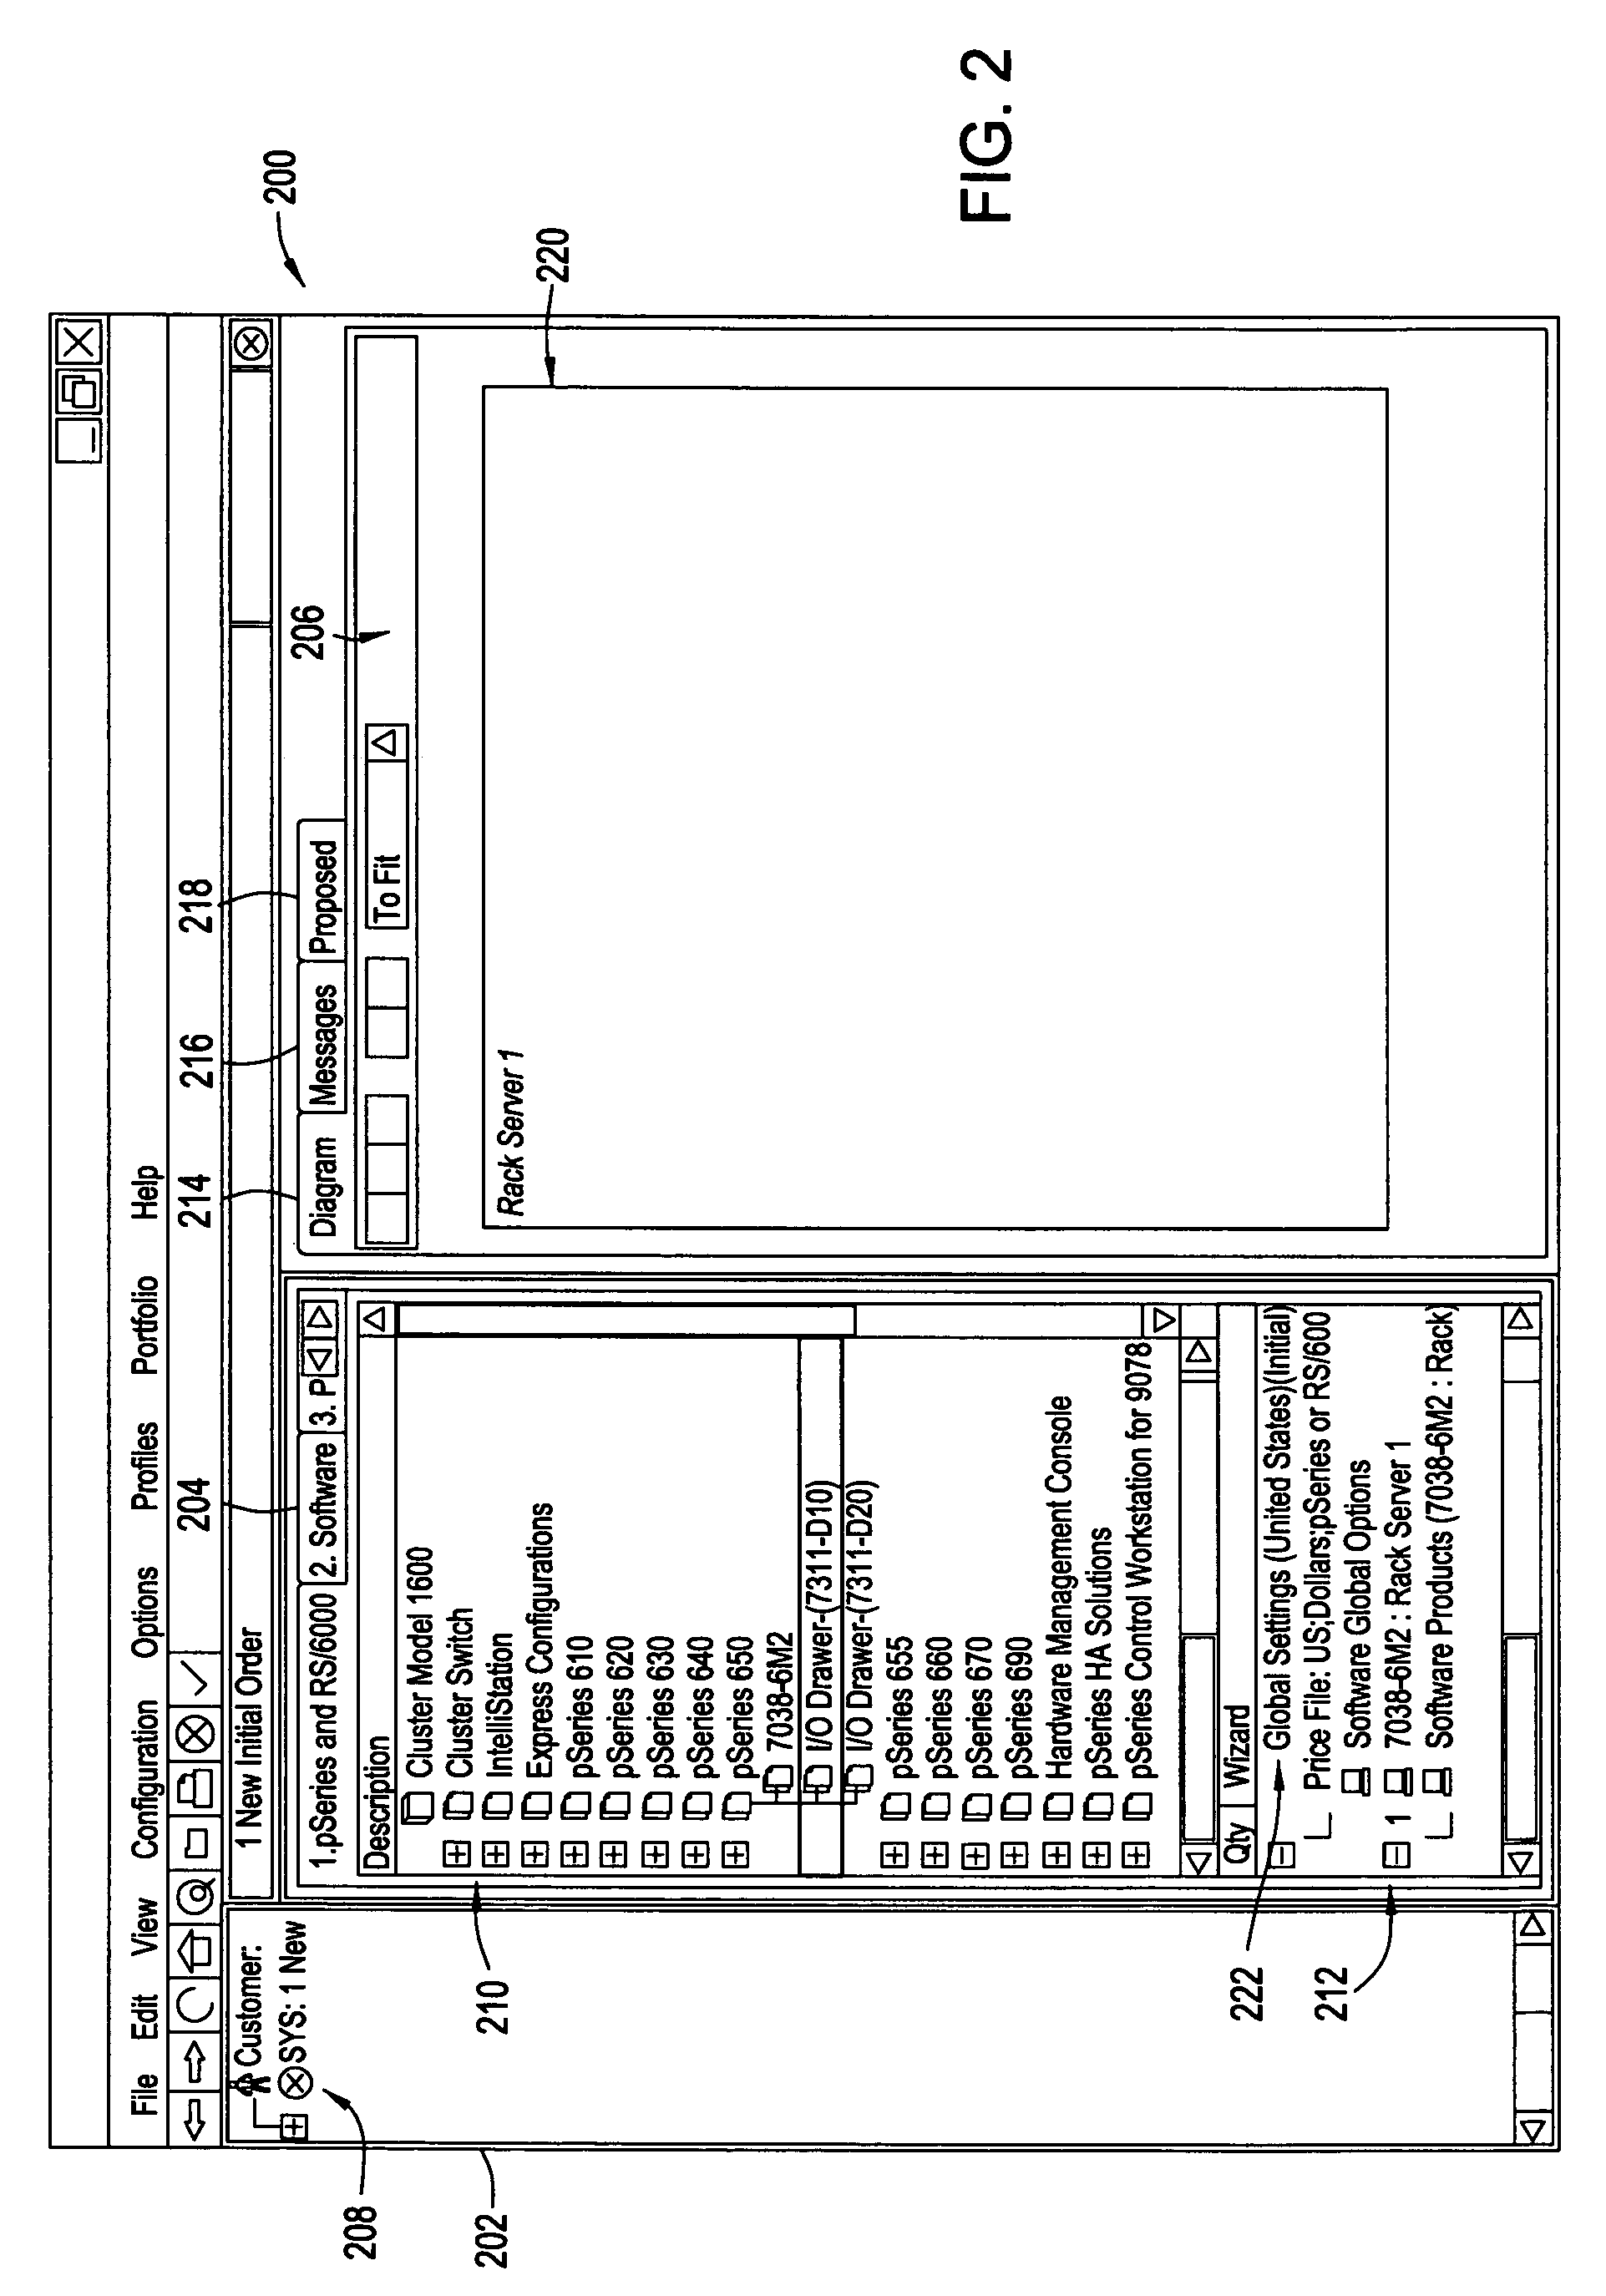 Method to establish contexts for use during automated product configuration